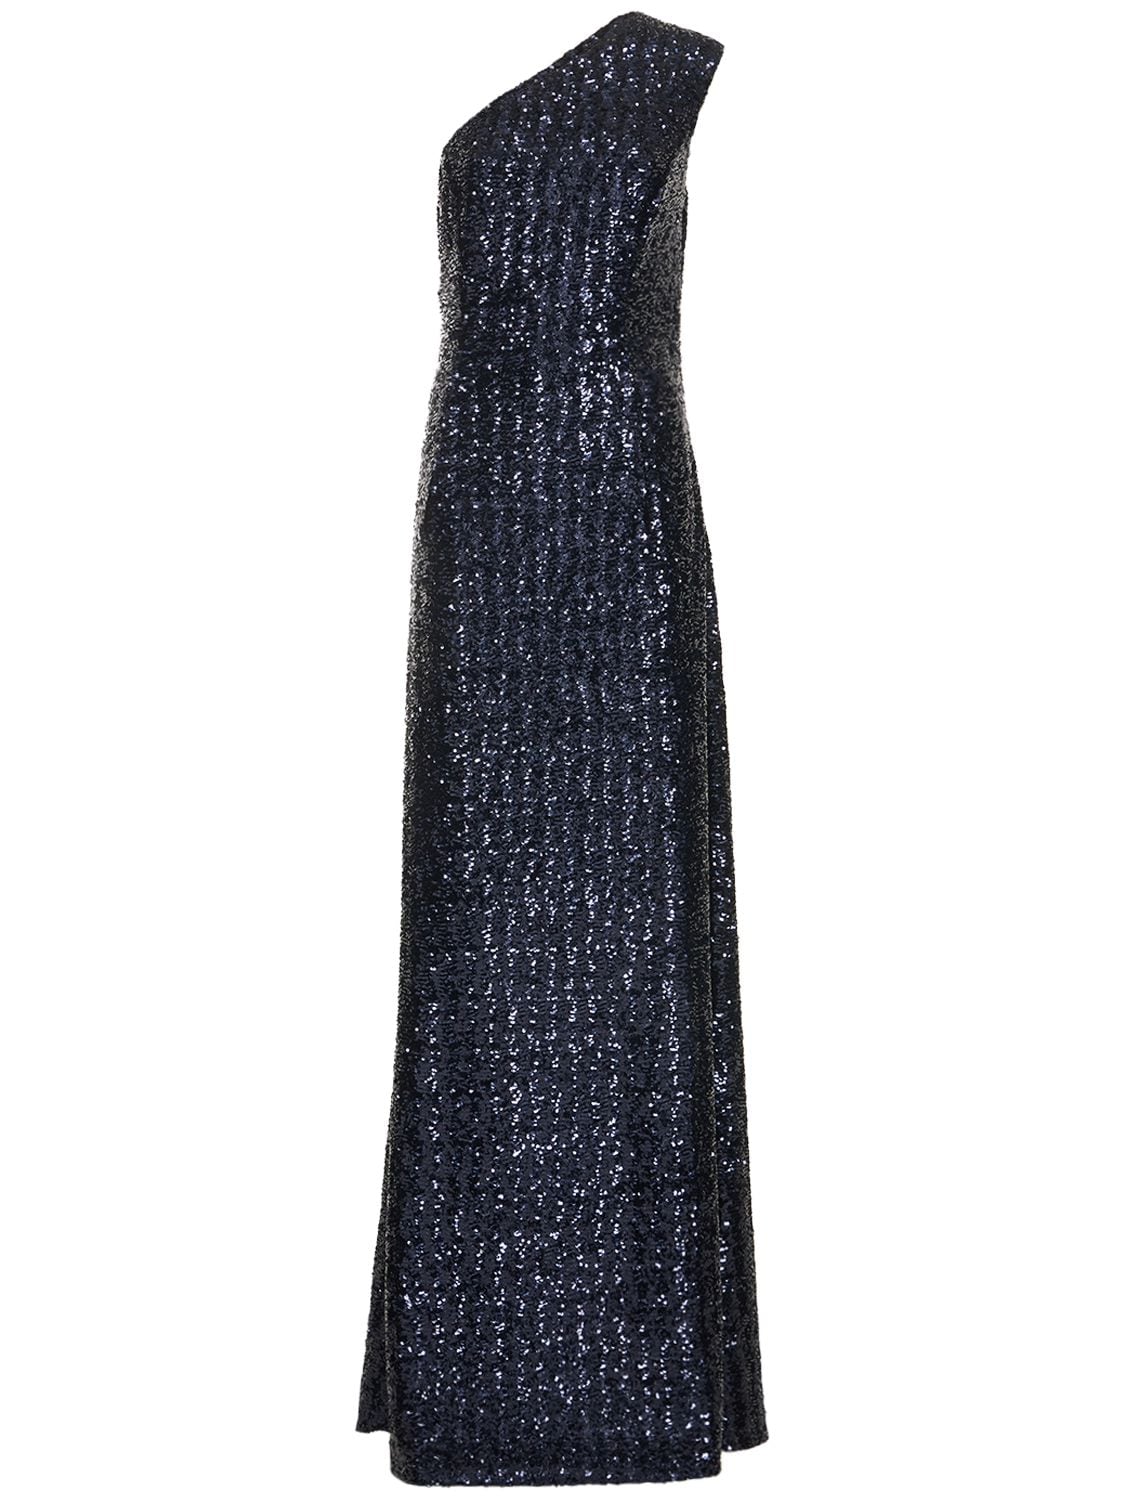 MICHAEL KORS COLLECTION Sequined Jersey One Shoulder Dress